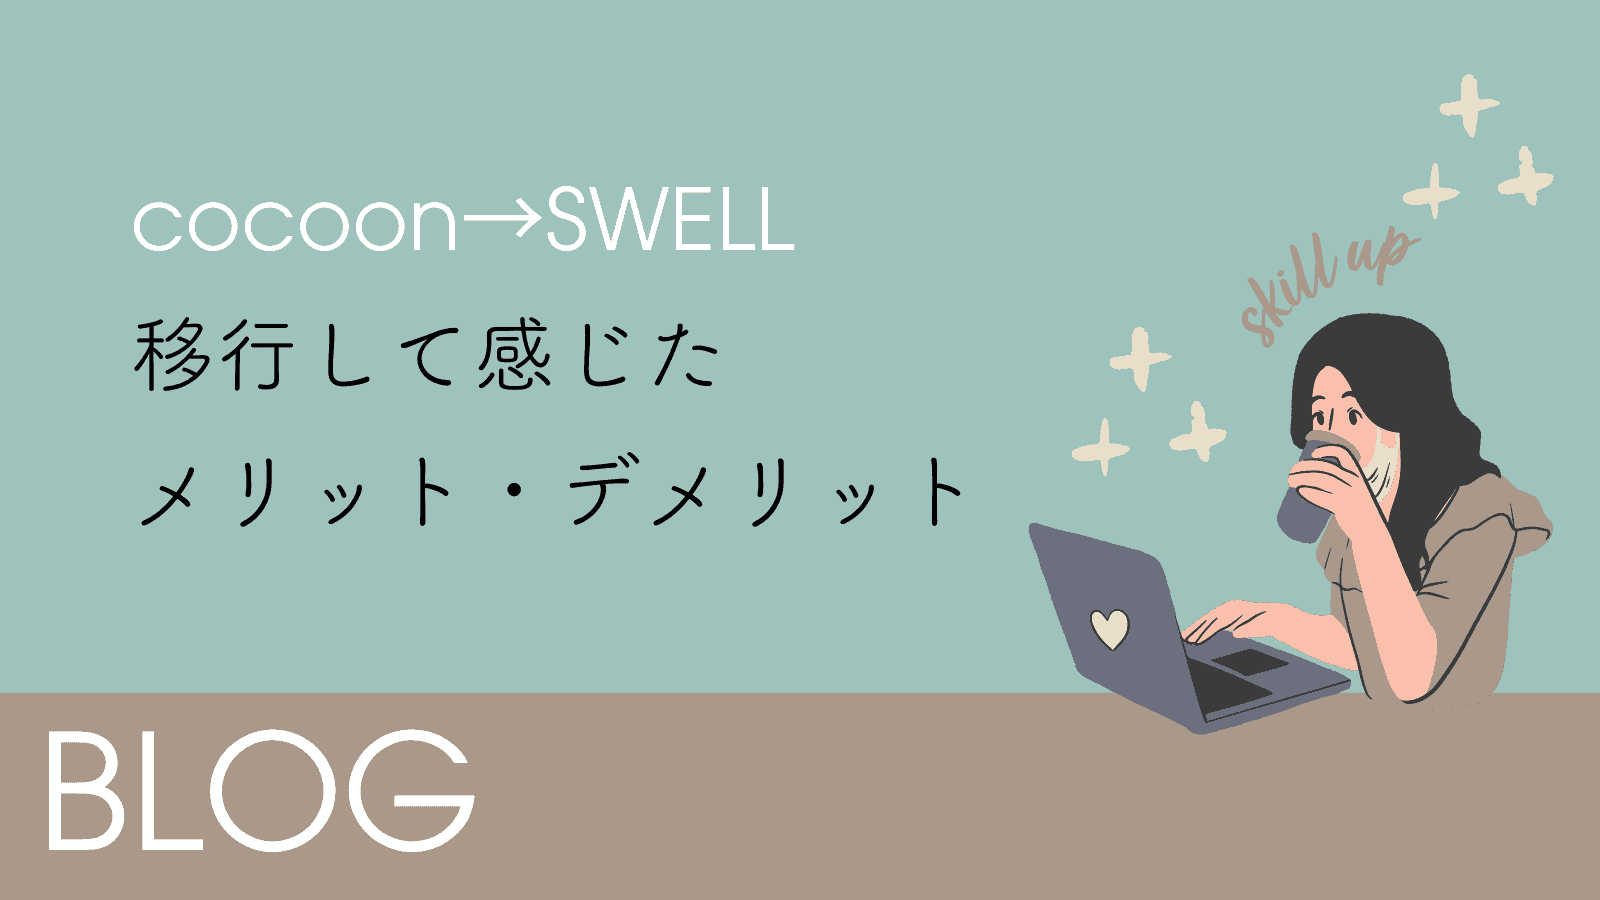 【CocoonからSWELLに移行】比較したメリット・デメリット